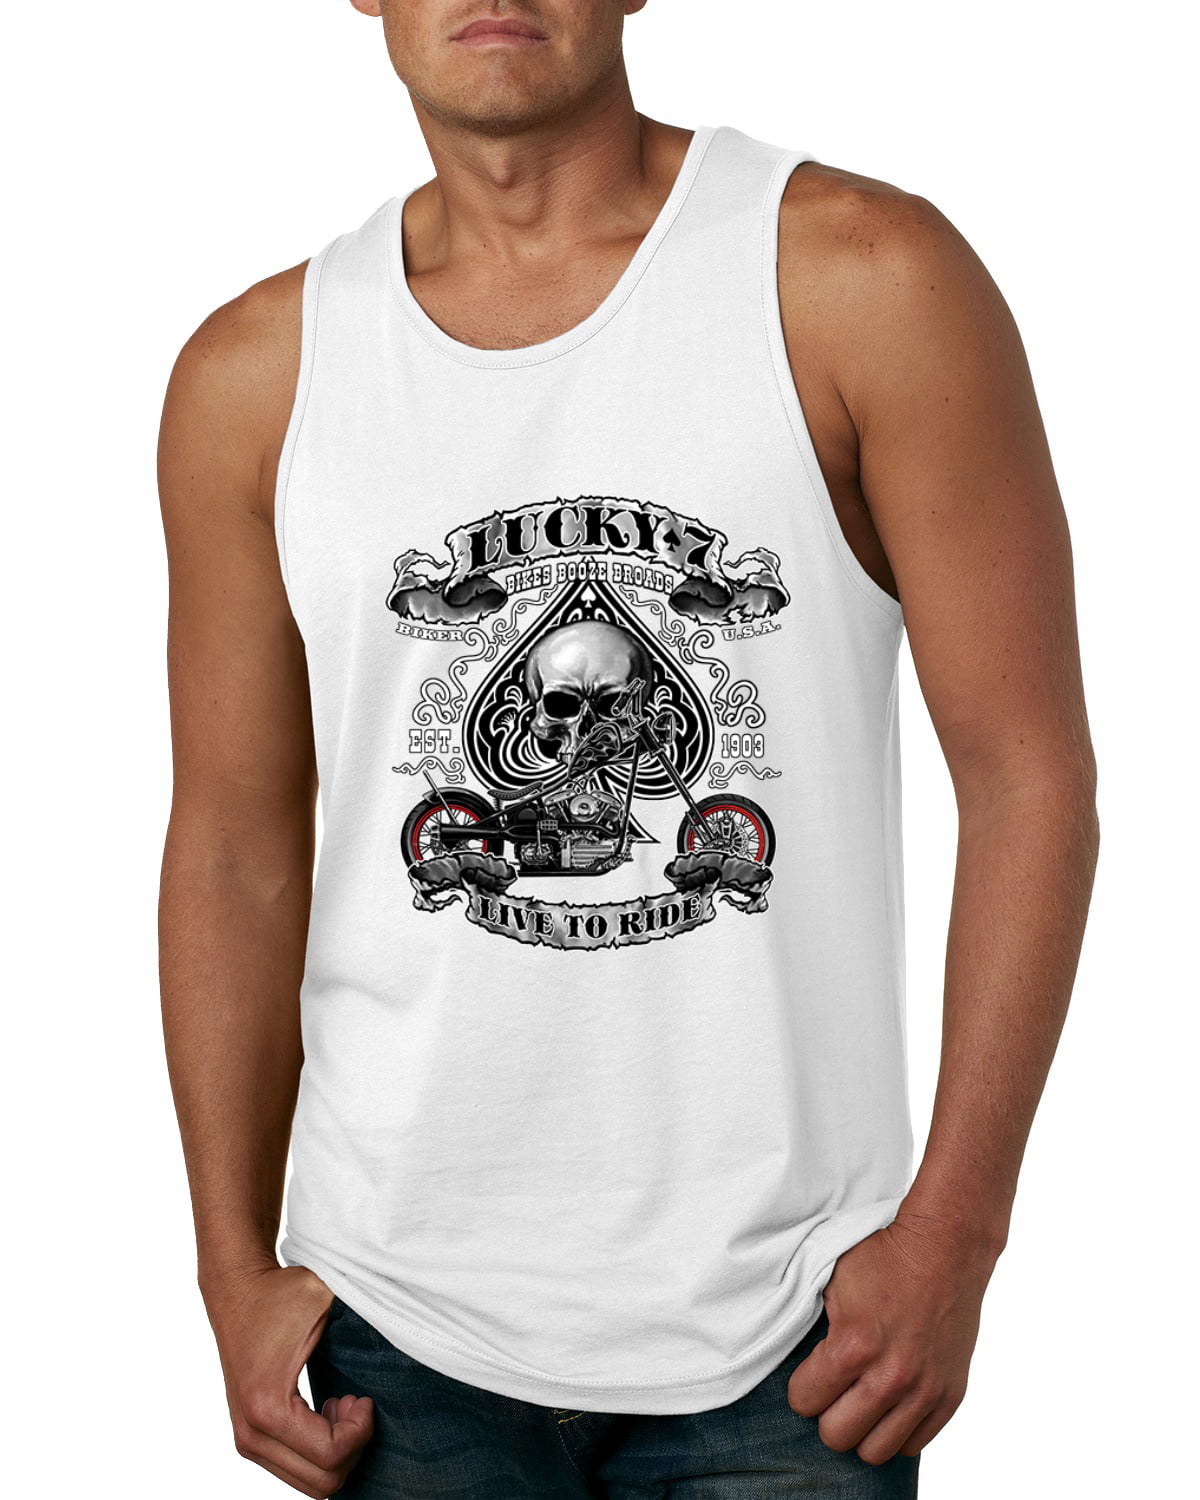 Lucky 7 Bikes Booze Broads Tank Top Live to Ride Route 66 